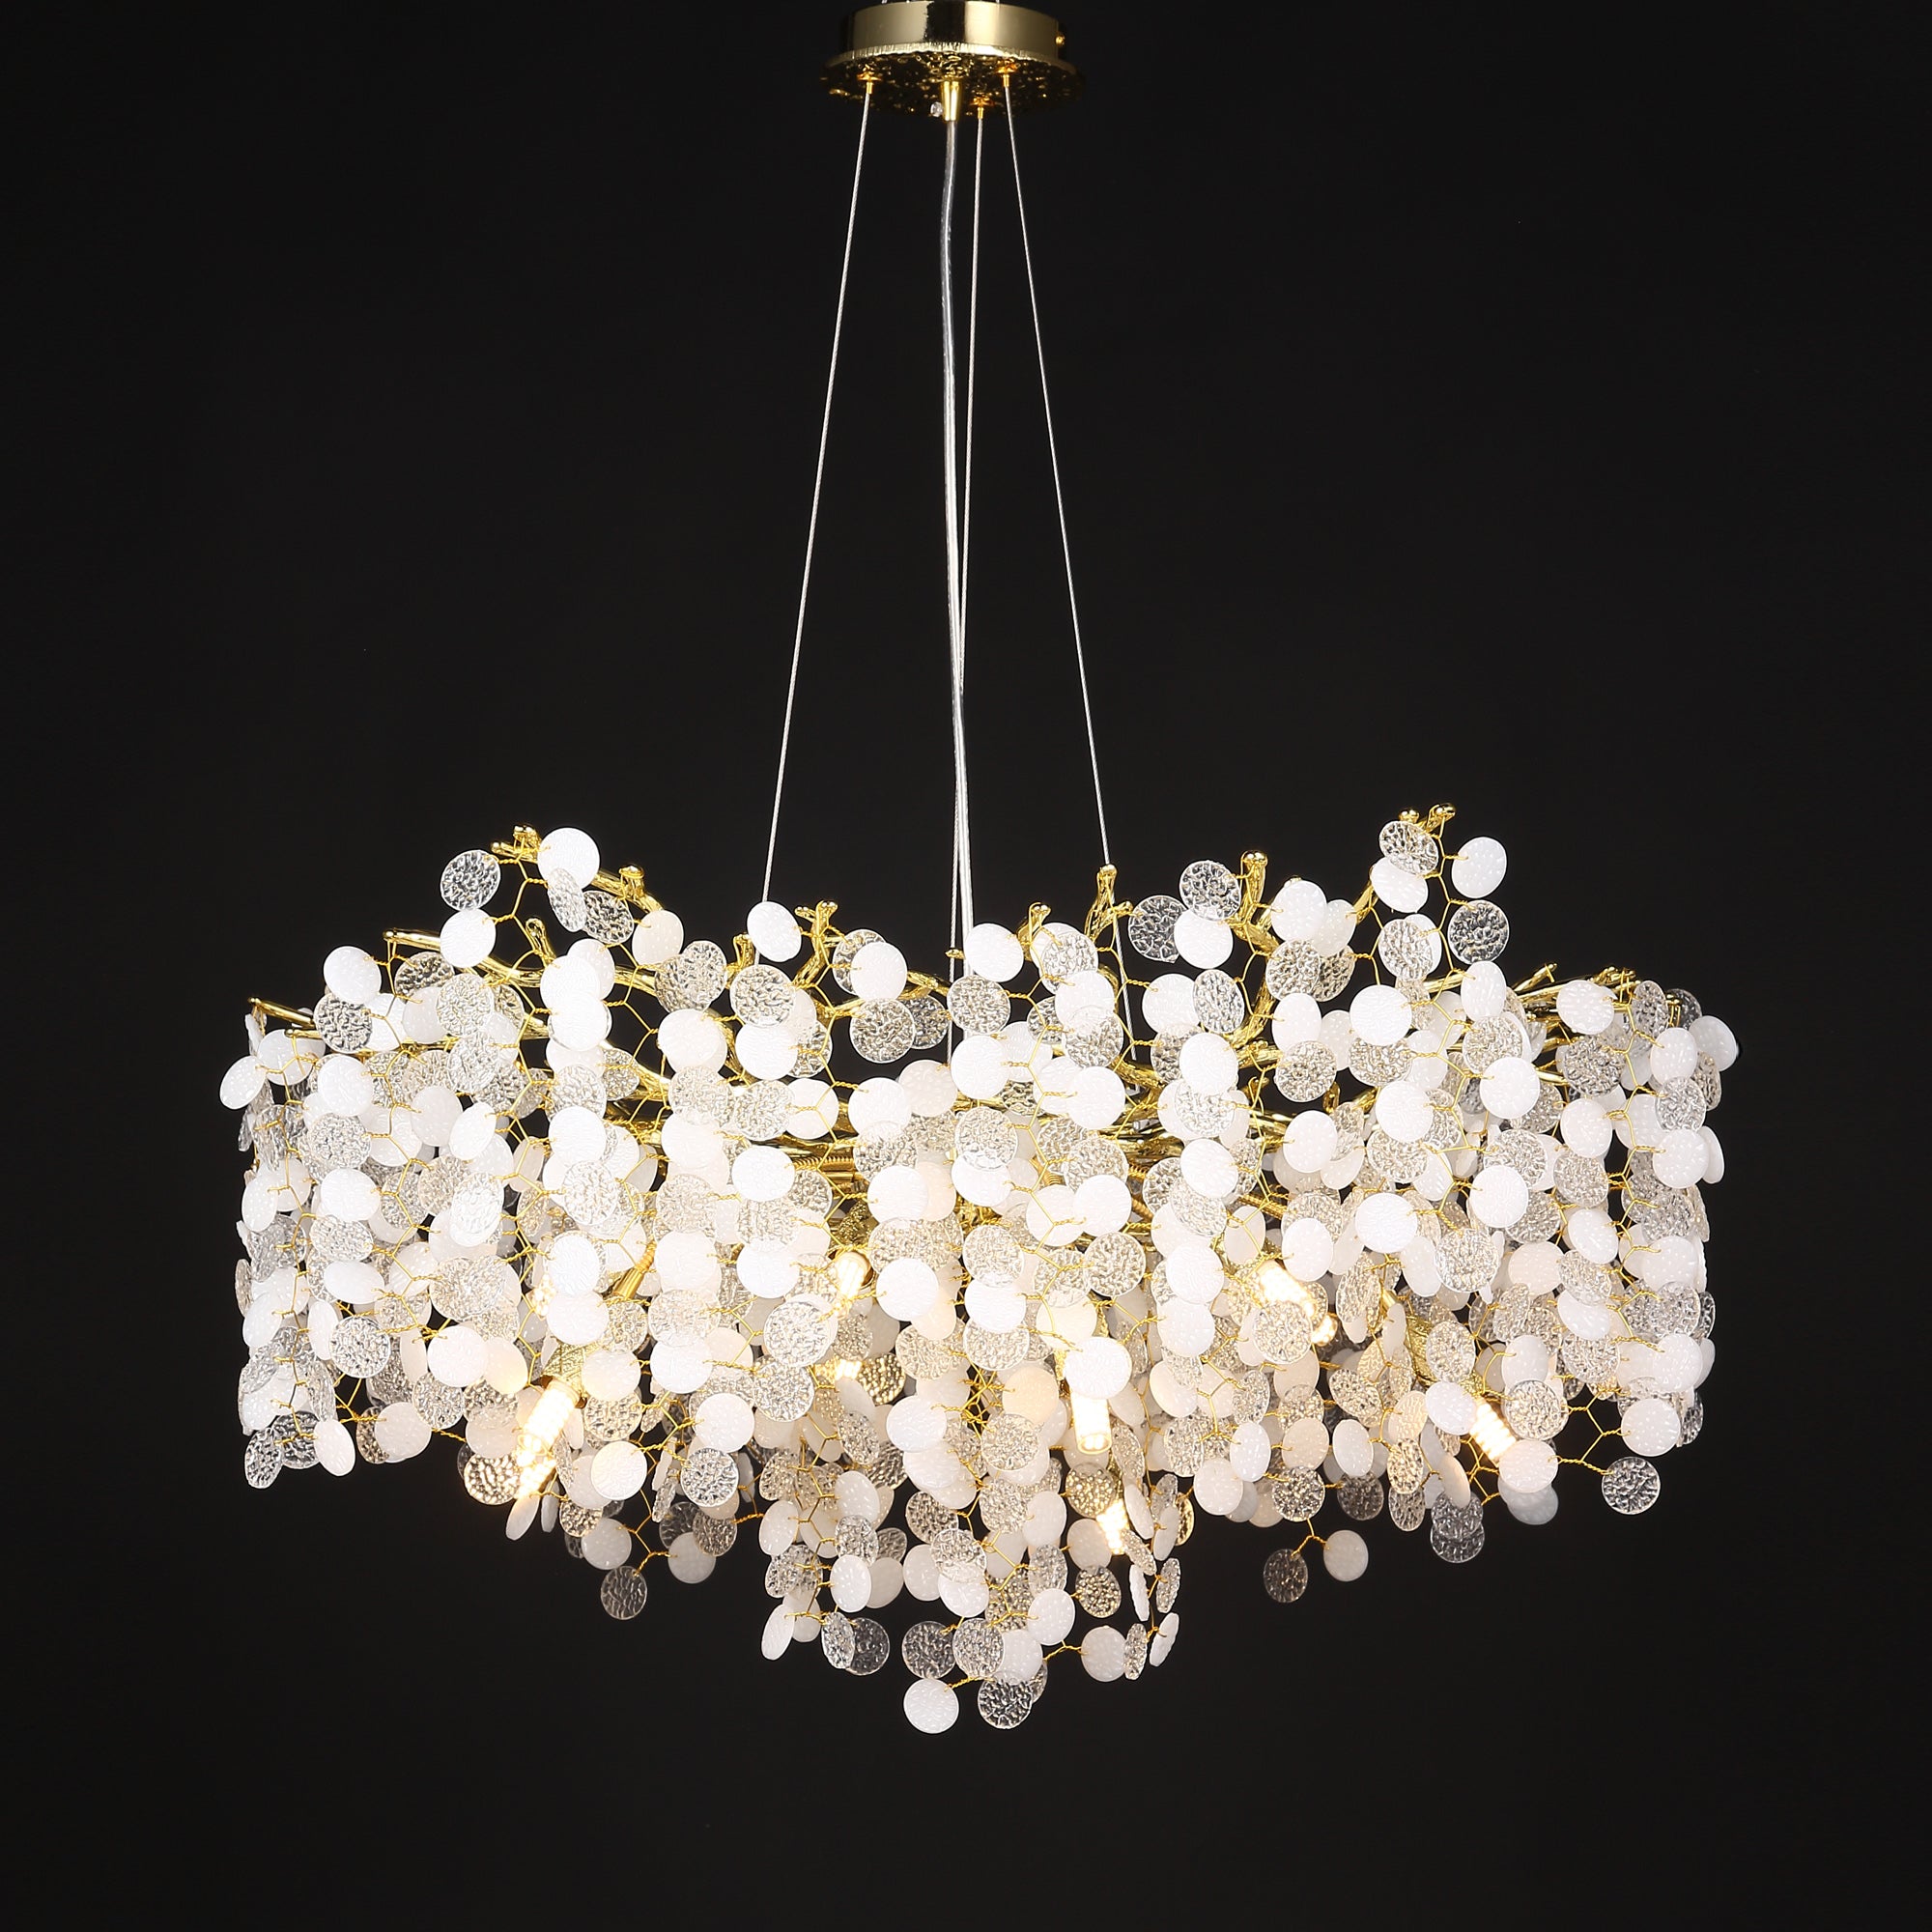 Flavia Modern Gold Blossom Crystal Round Branch Chandelier For Living Room